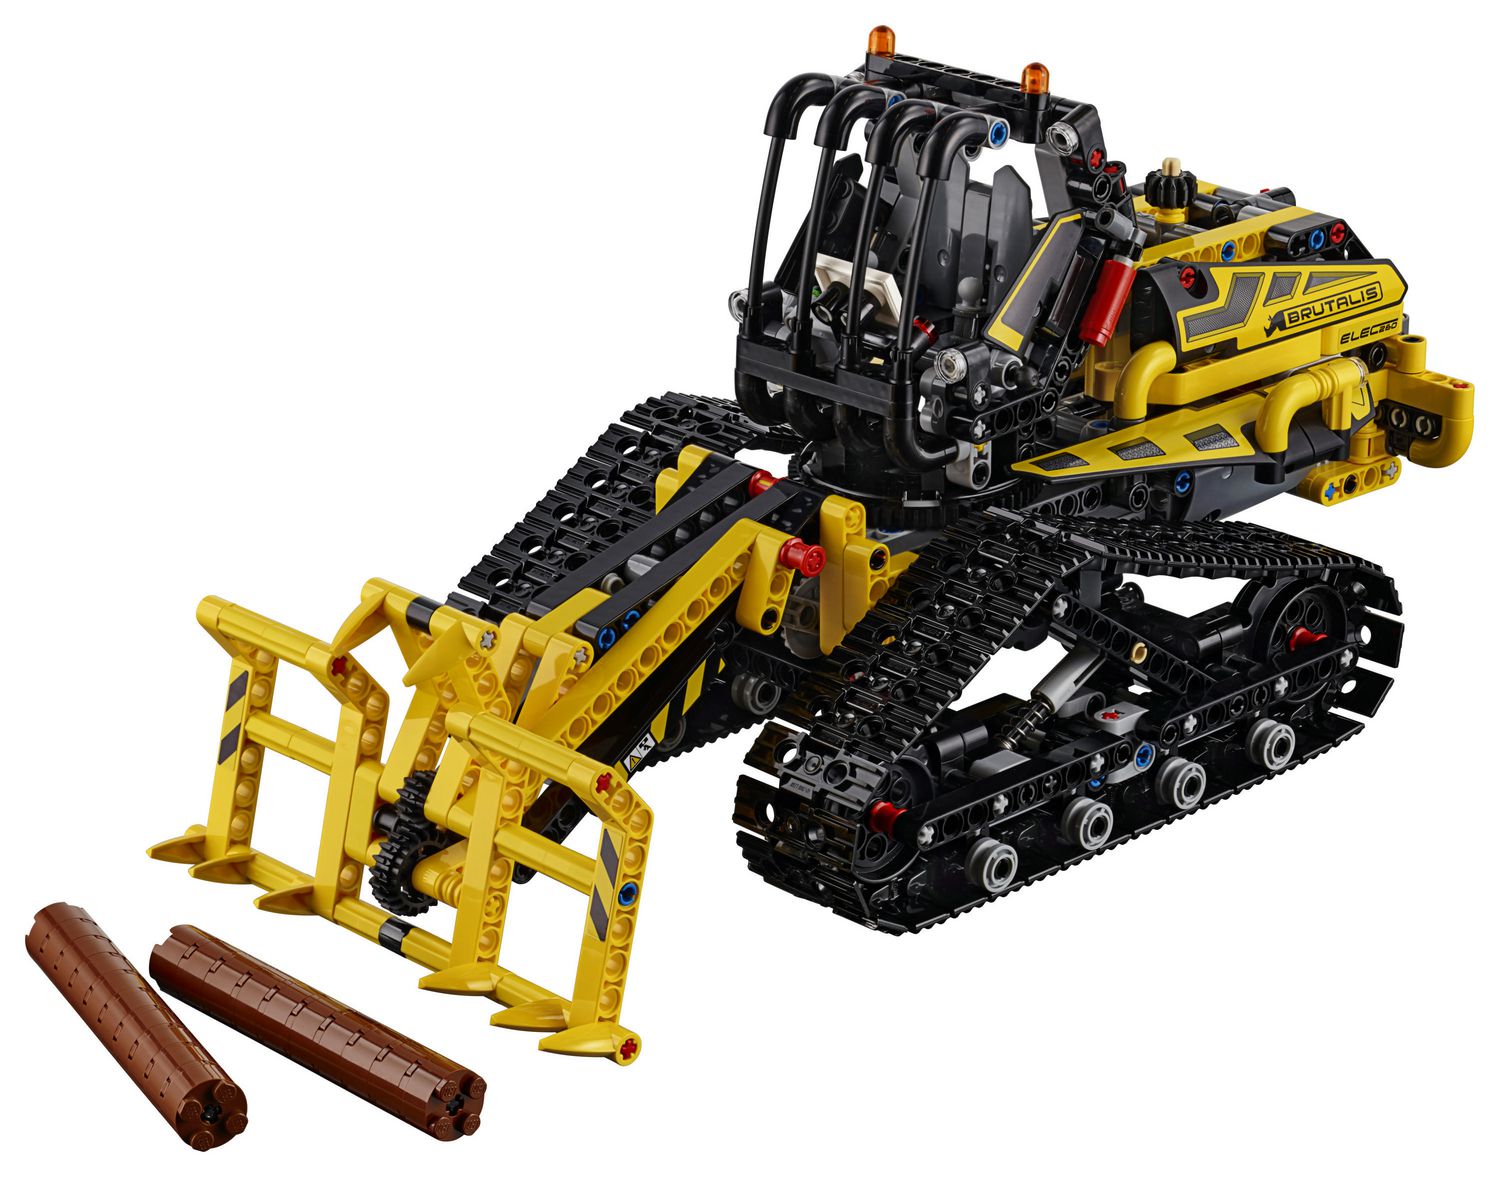 LEGO Technic Tracked Loader 42094 Building Kit (827 Piece